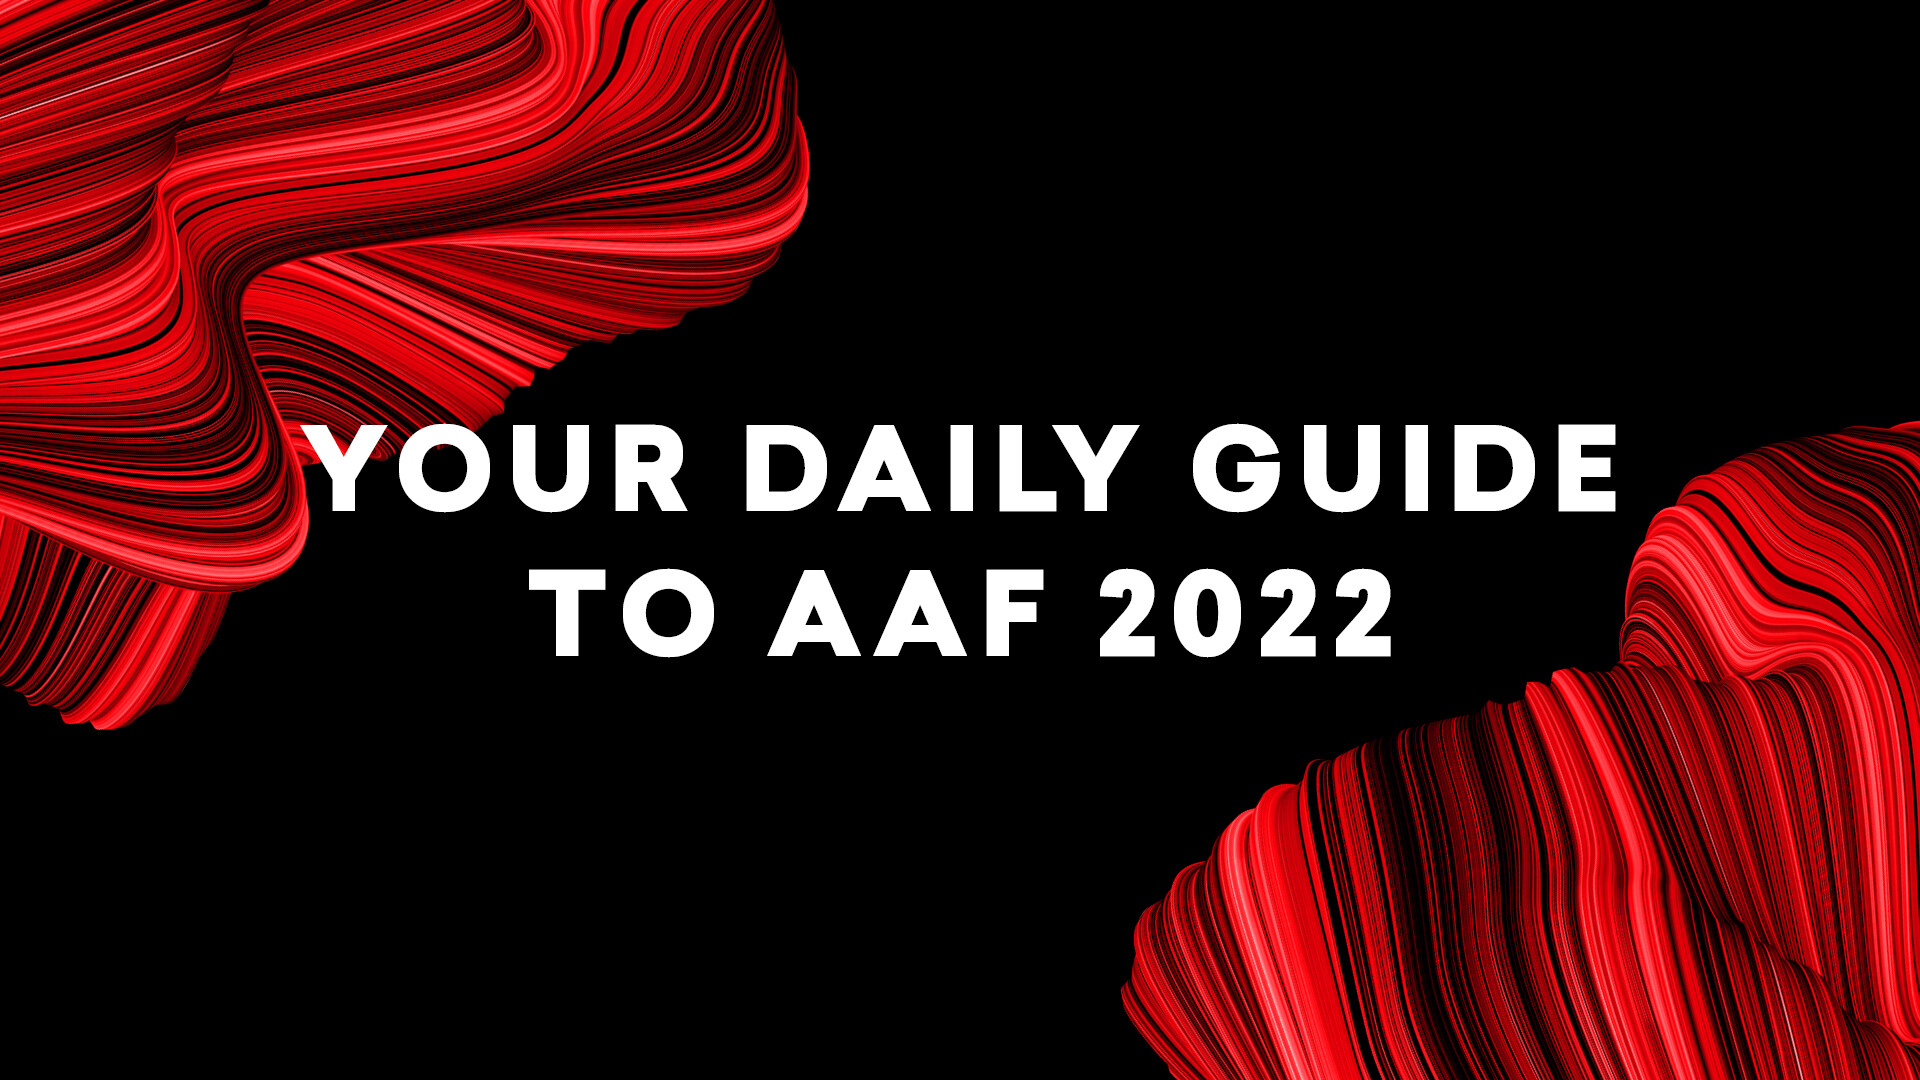 Your Daily Guide to AAF 2022